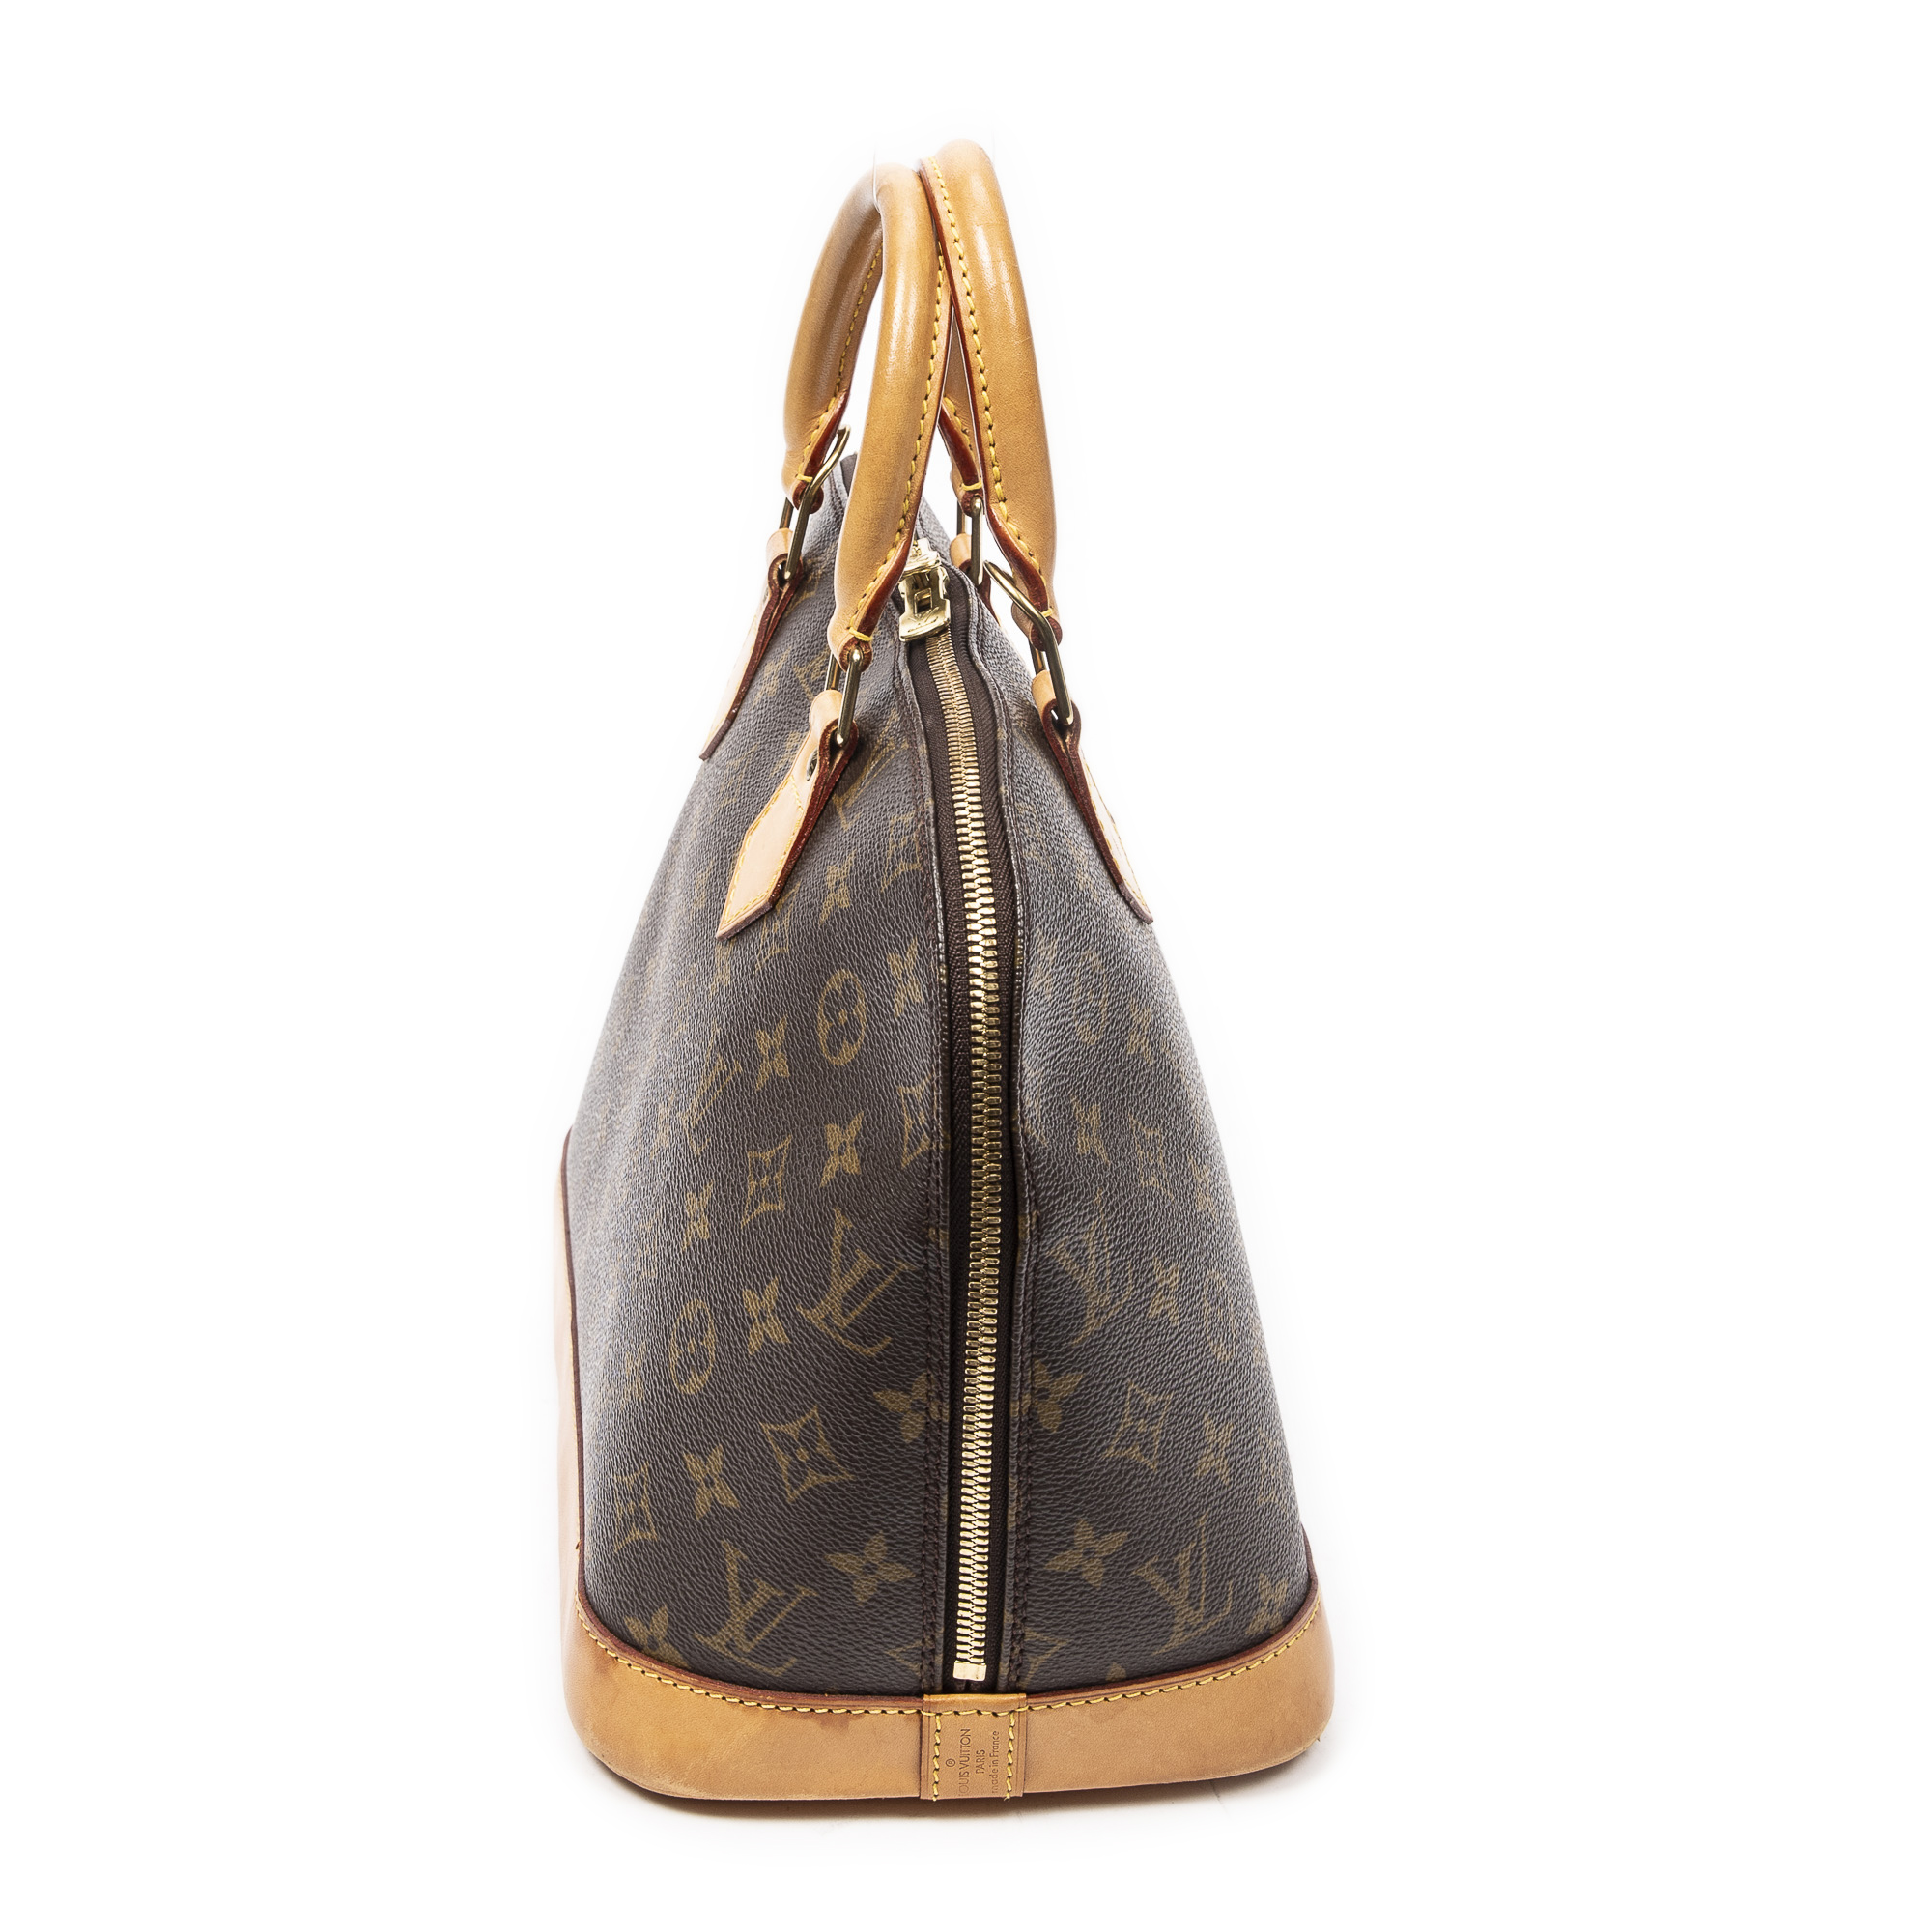 Products by Louis Vuitton: Alma PM